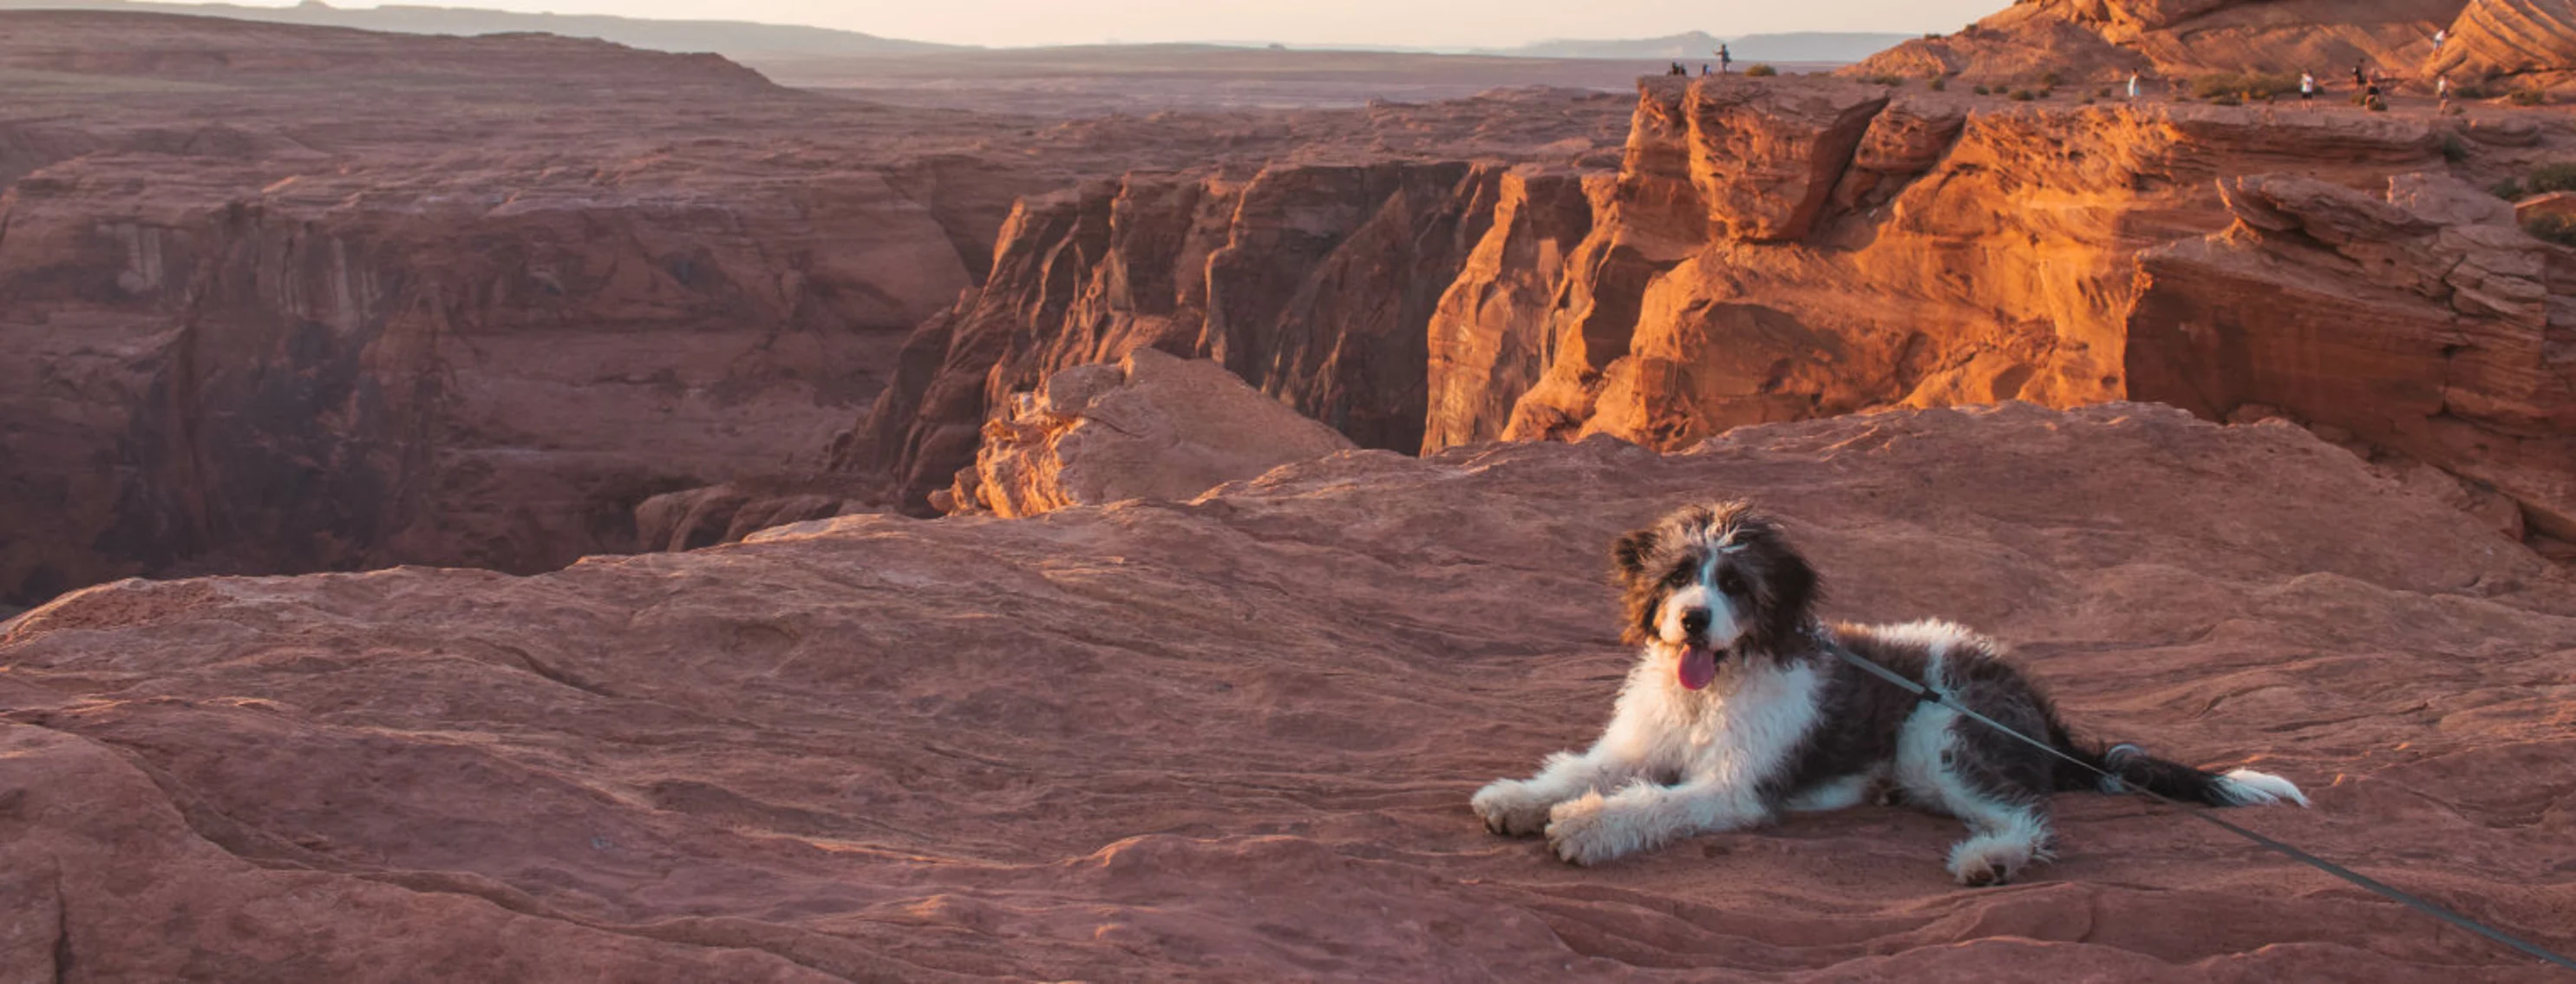 Dog Lying Down in Canyon During Sunset